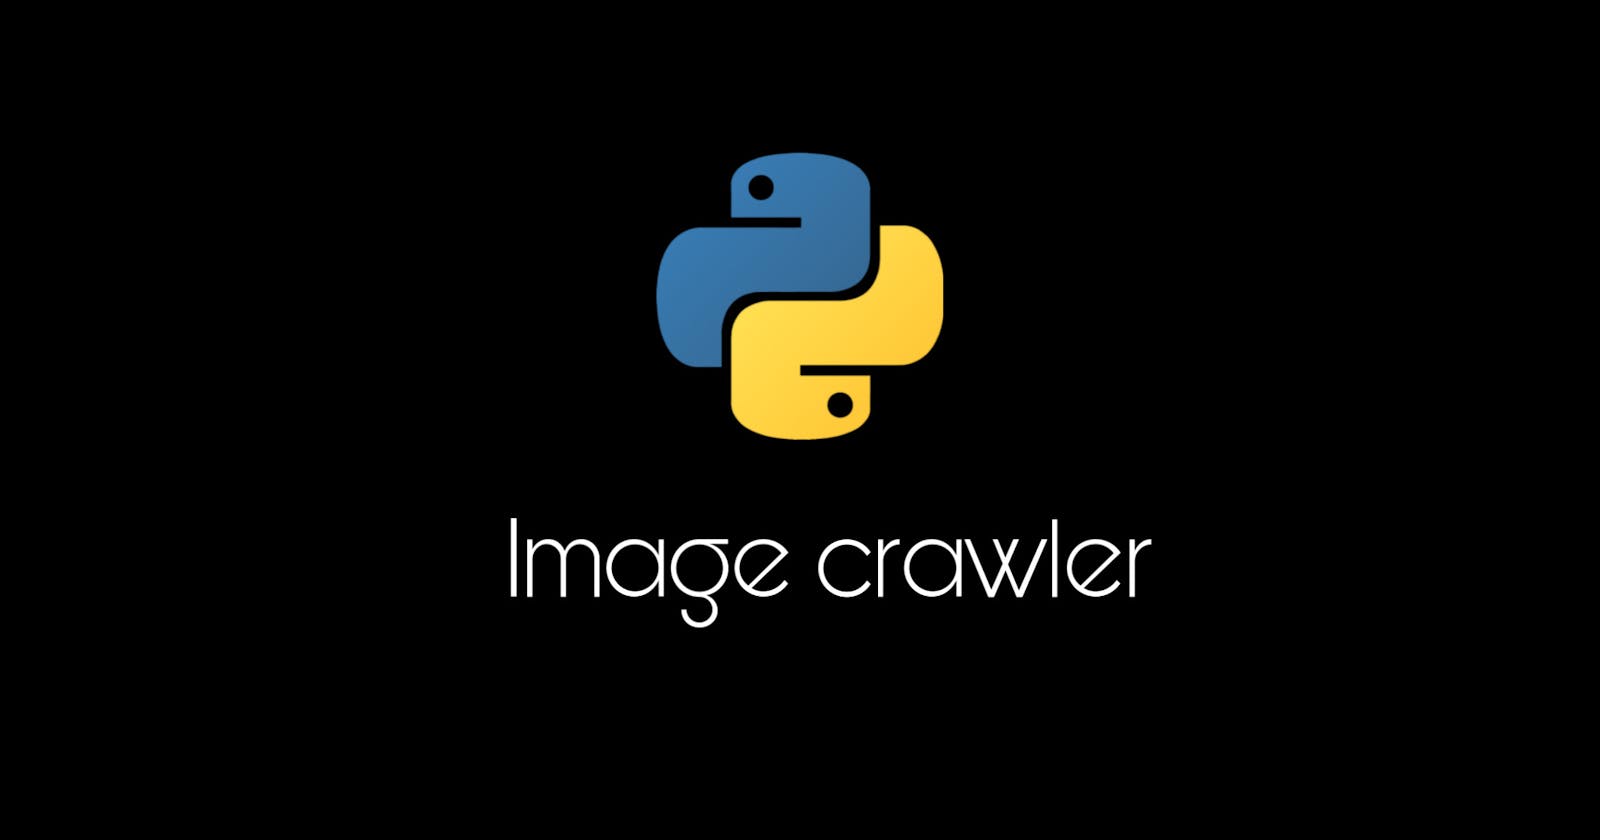 Download  RAW Images by keyword using Python